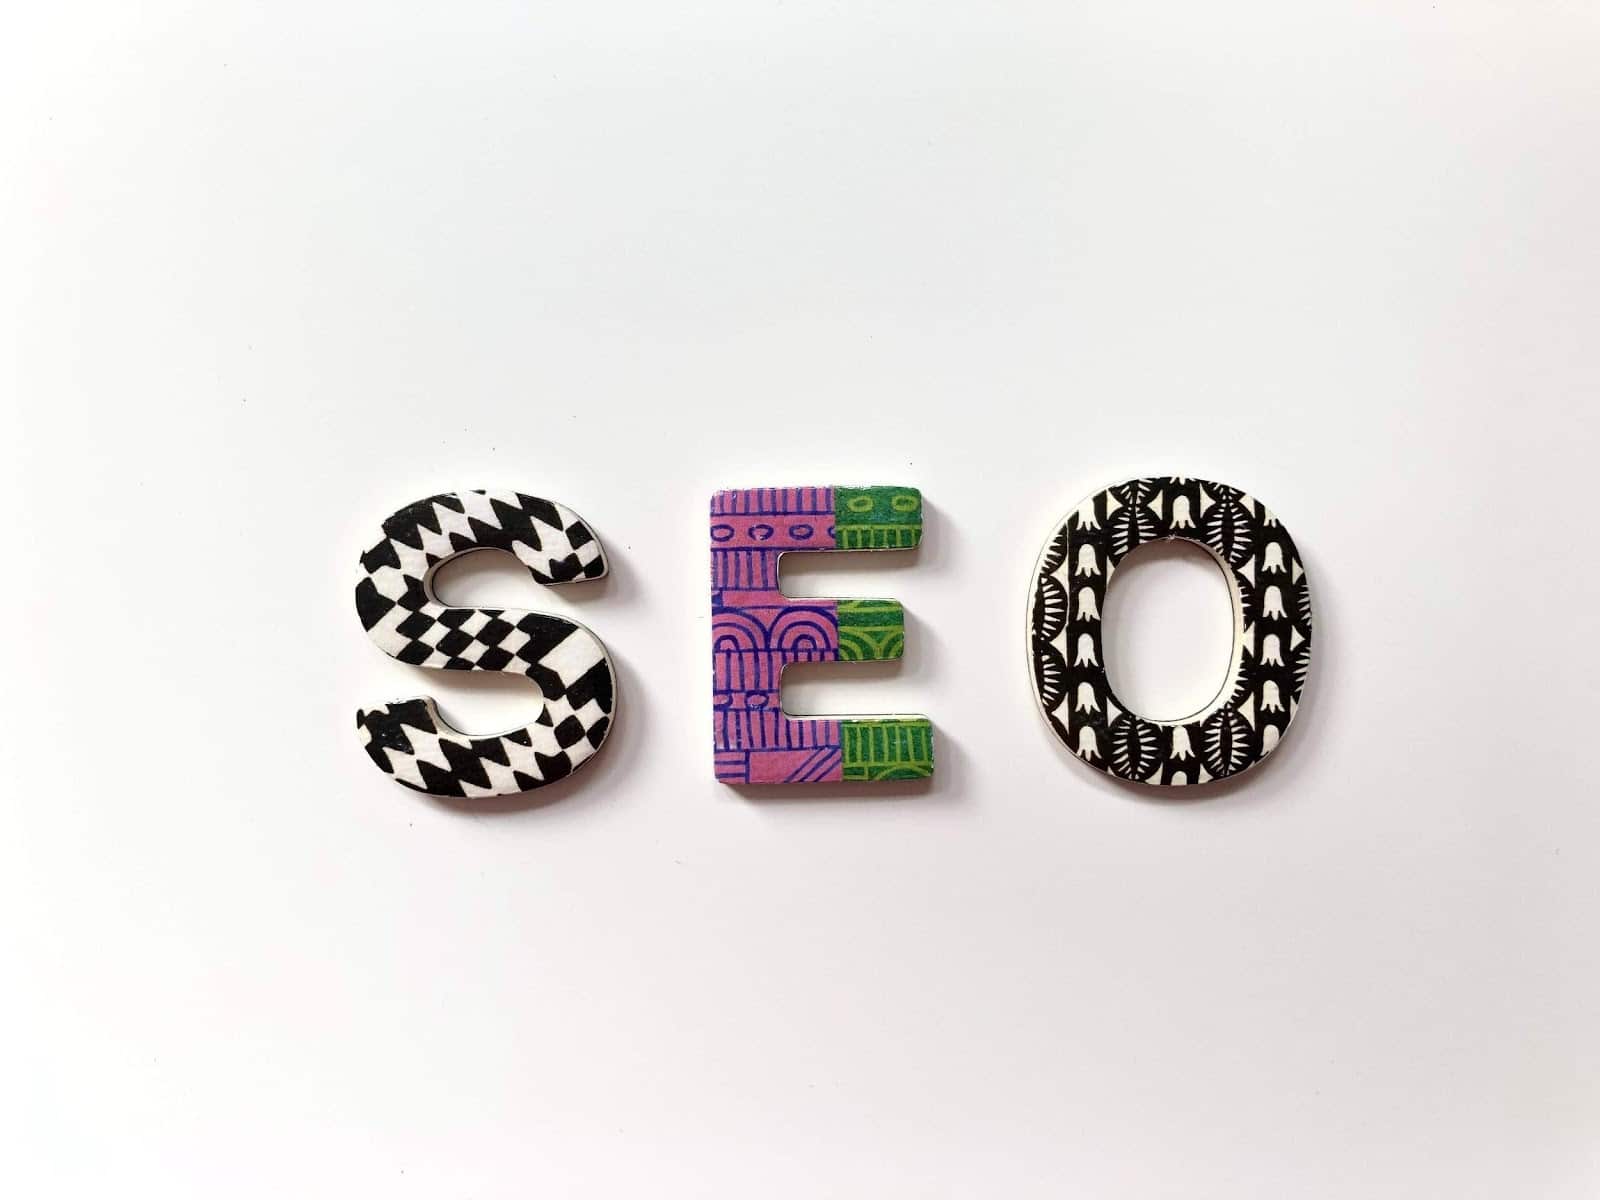 7 Common Link Building Mistakes You Should Avoid in SEO